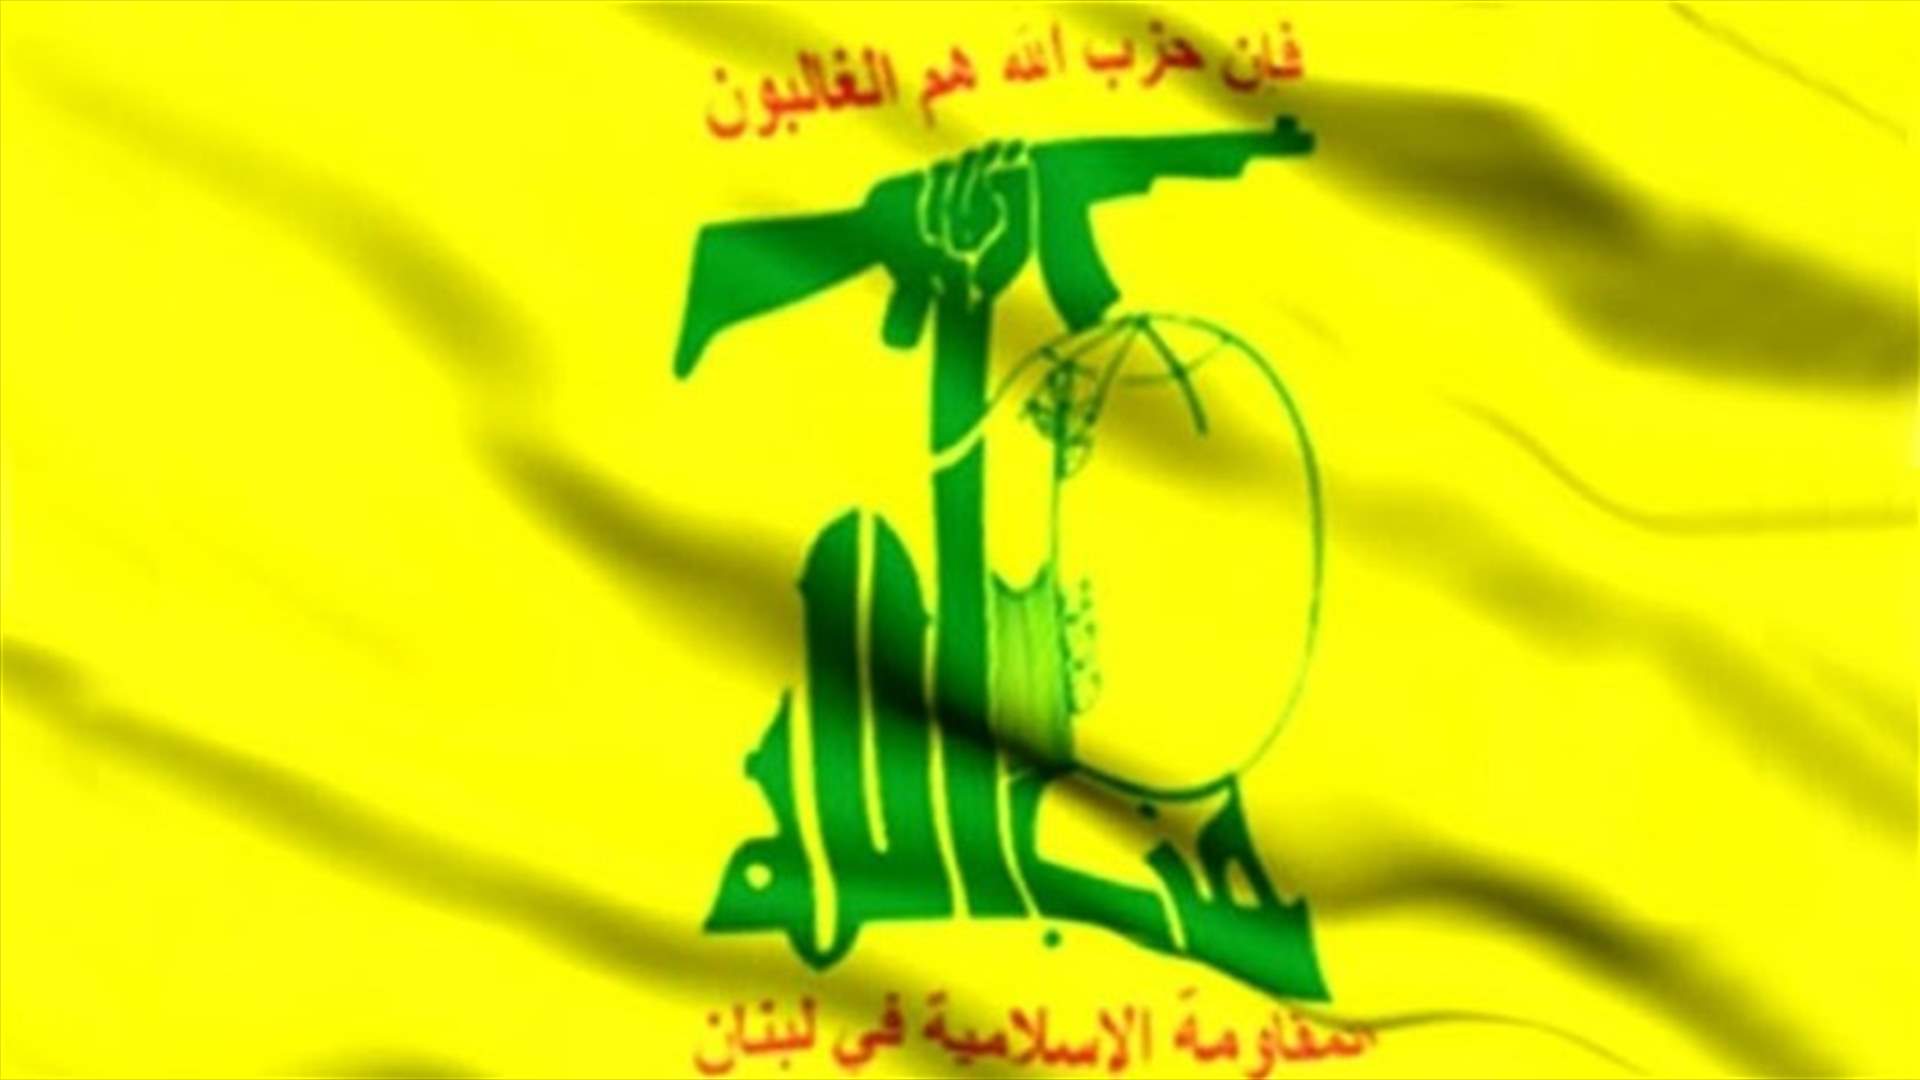 Hezbollah denounces Nice terror attack, says it is a reflection of terrorism Middle East is facing